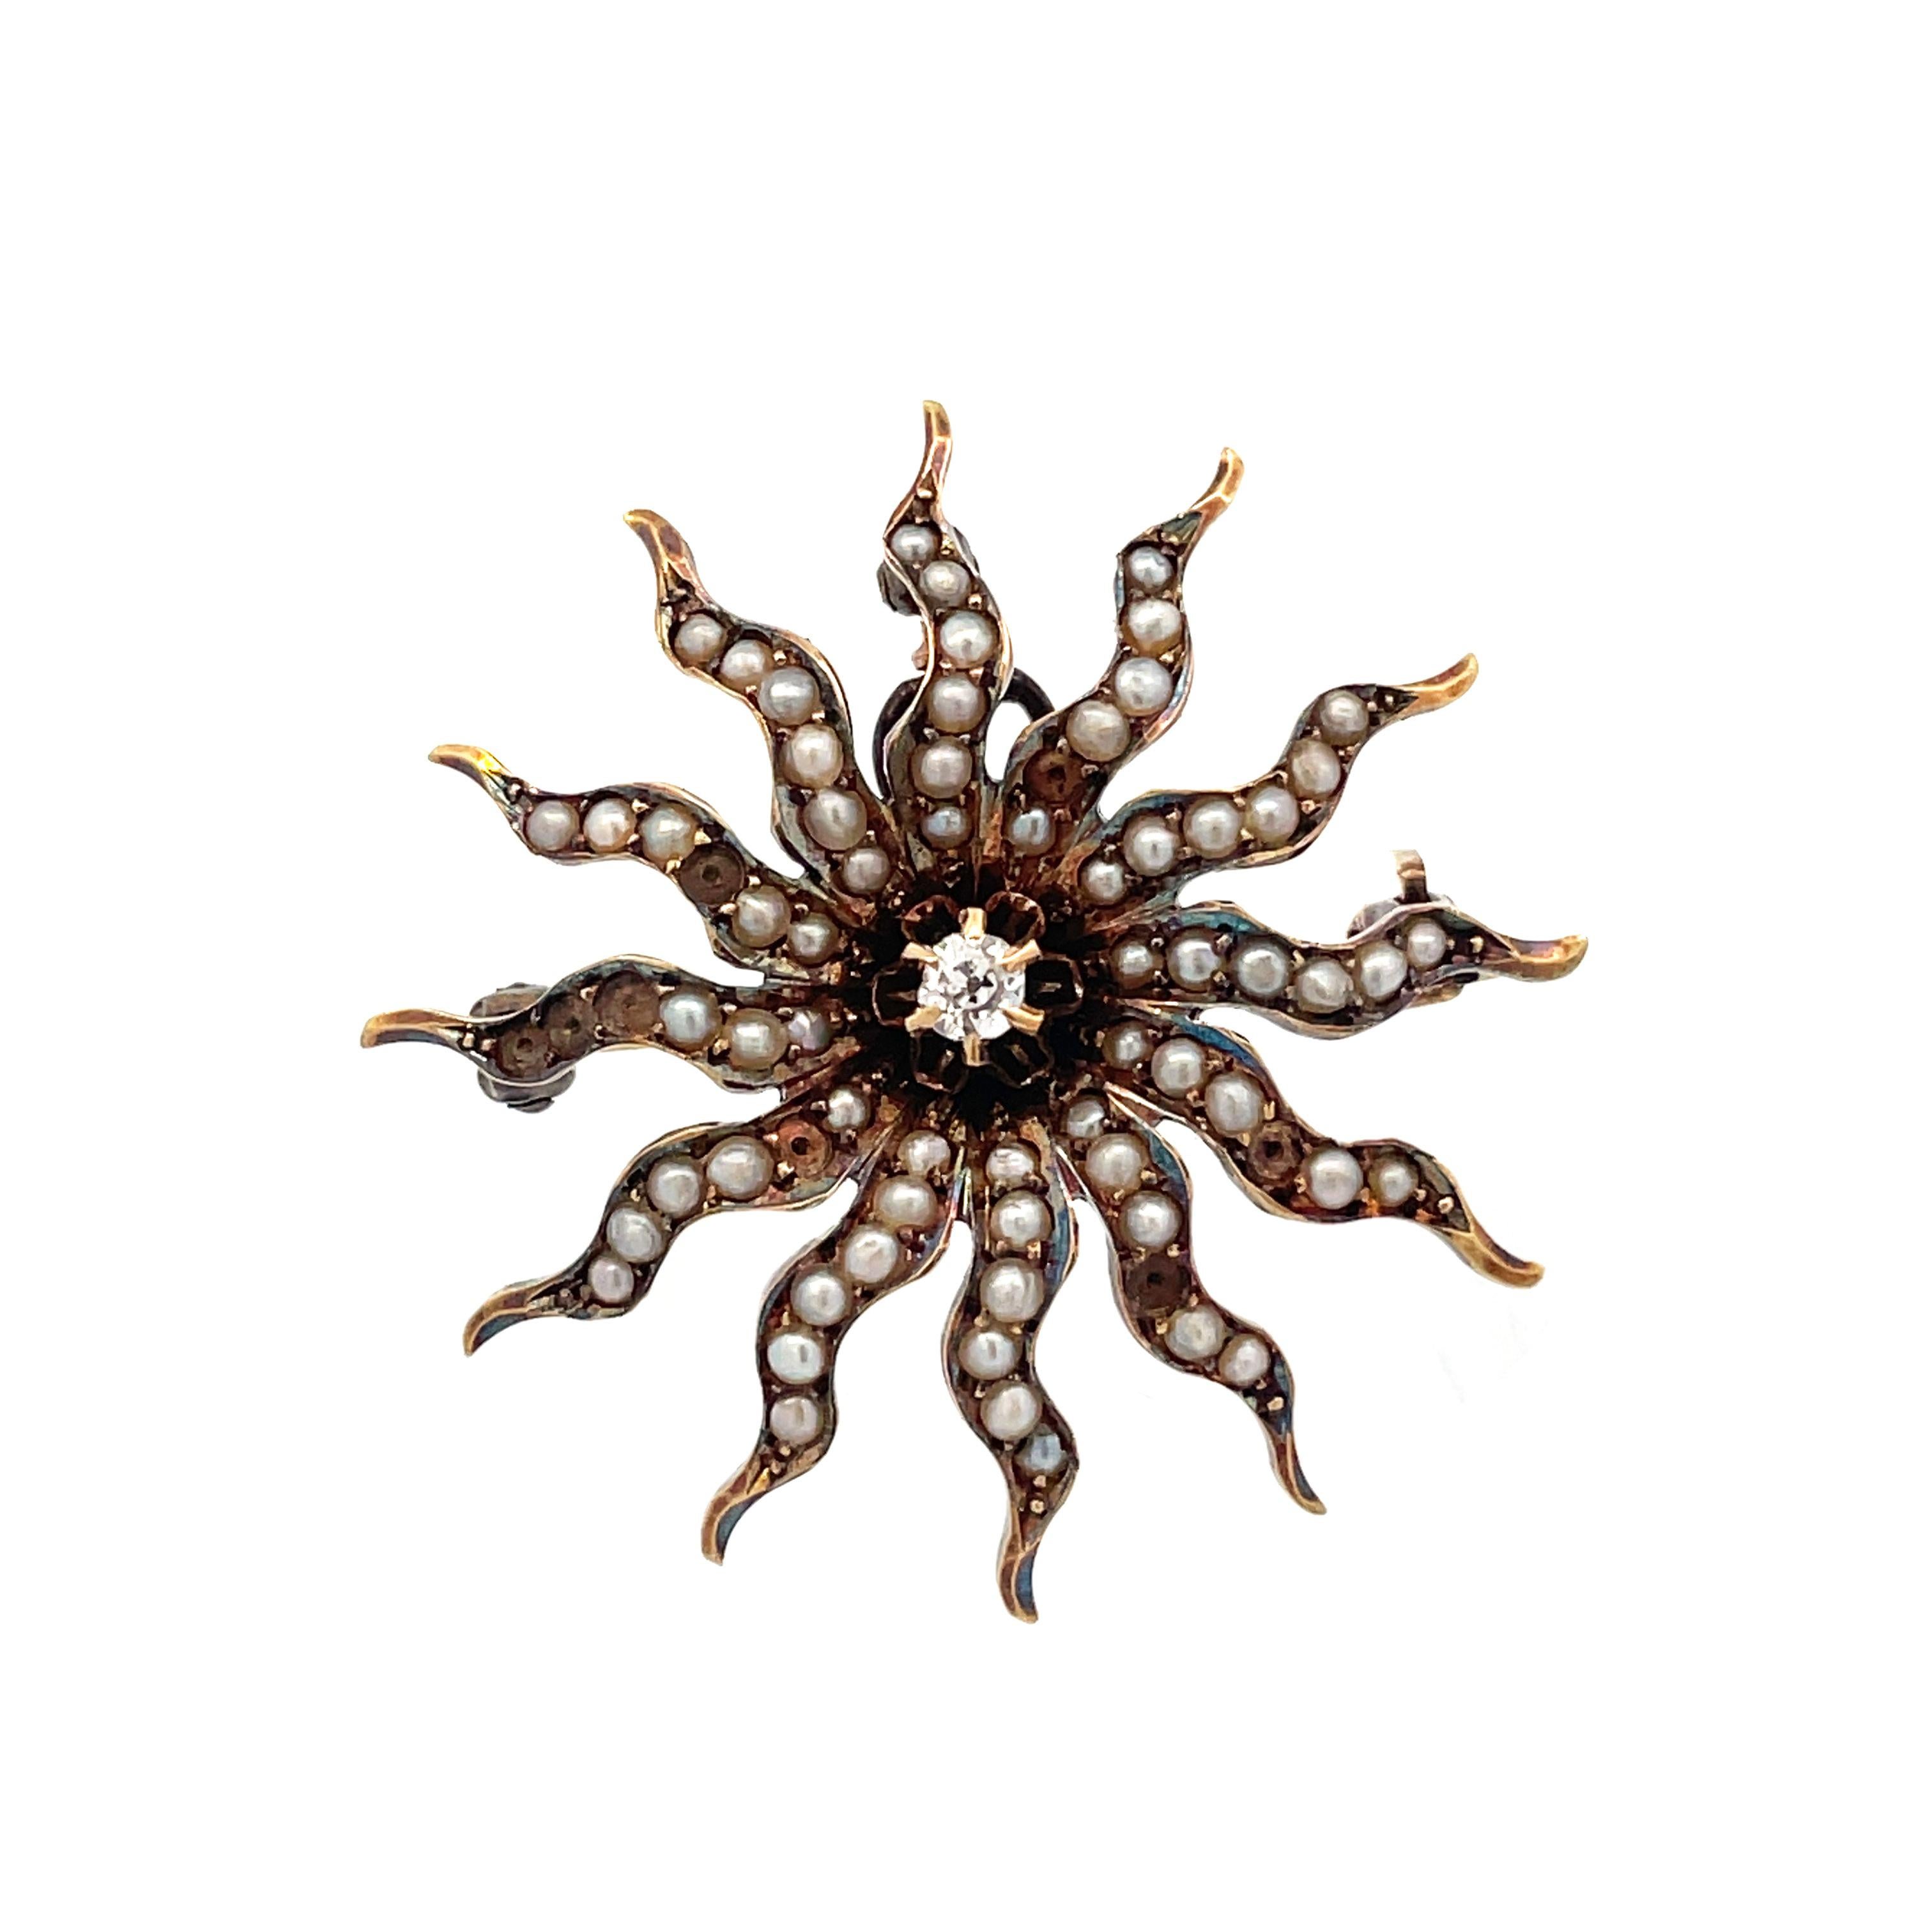 This is a beautiful Edwardian pin/pendant crafted in 14K yellow gold that showcases a stunning collection of seed pearls and an Old Mine Cut diamond at the center. This lovely Edwardian pin has a whimsical sunburst design. The sun's rays are dotted